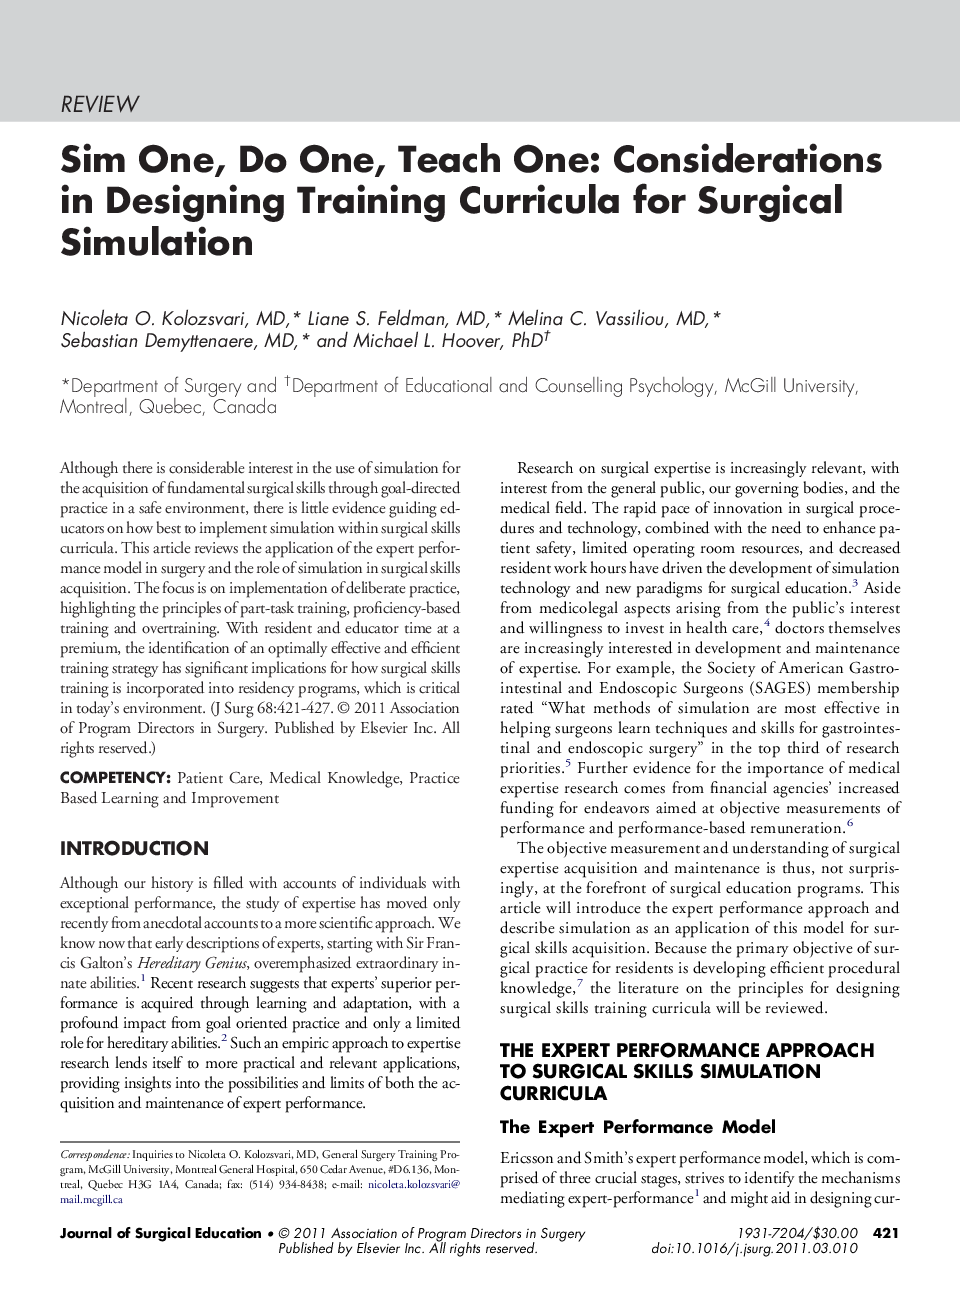 Sim One, Do One, Teach One: Considerations in Designing Training Curricula for Surgical Simulation